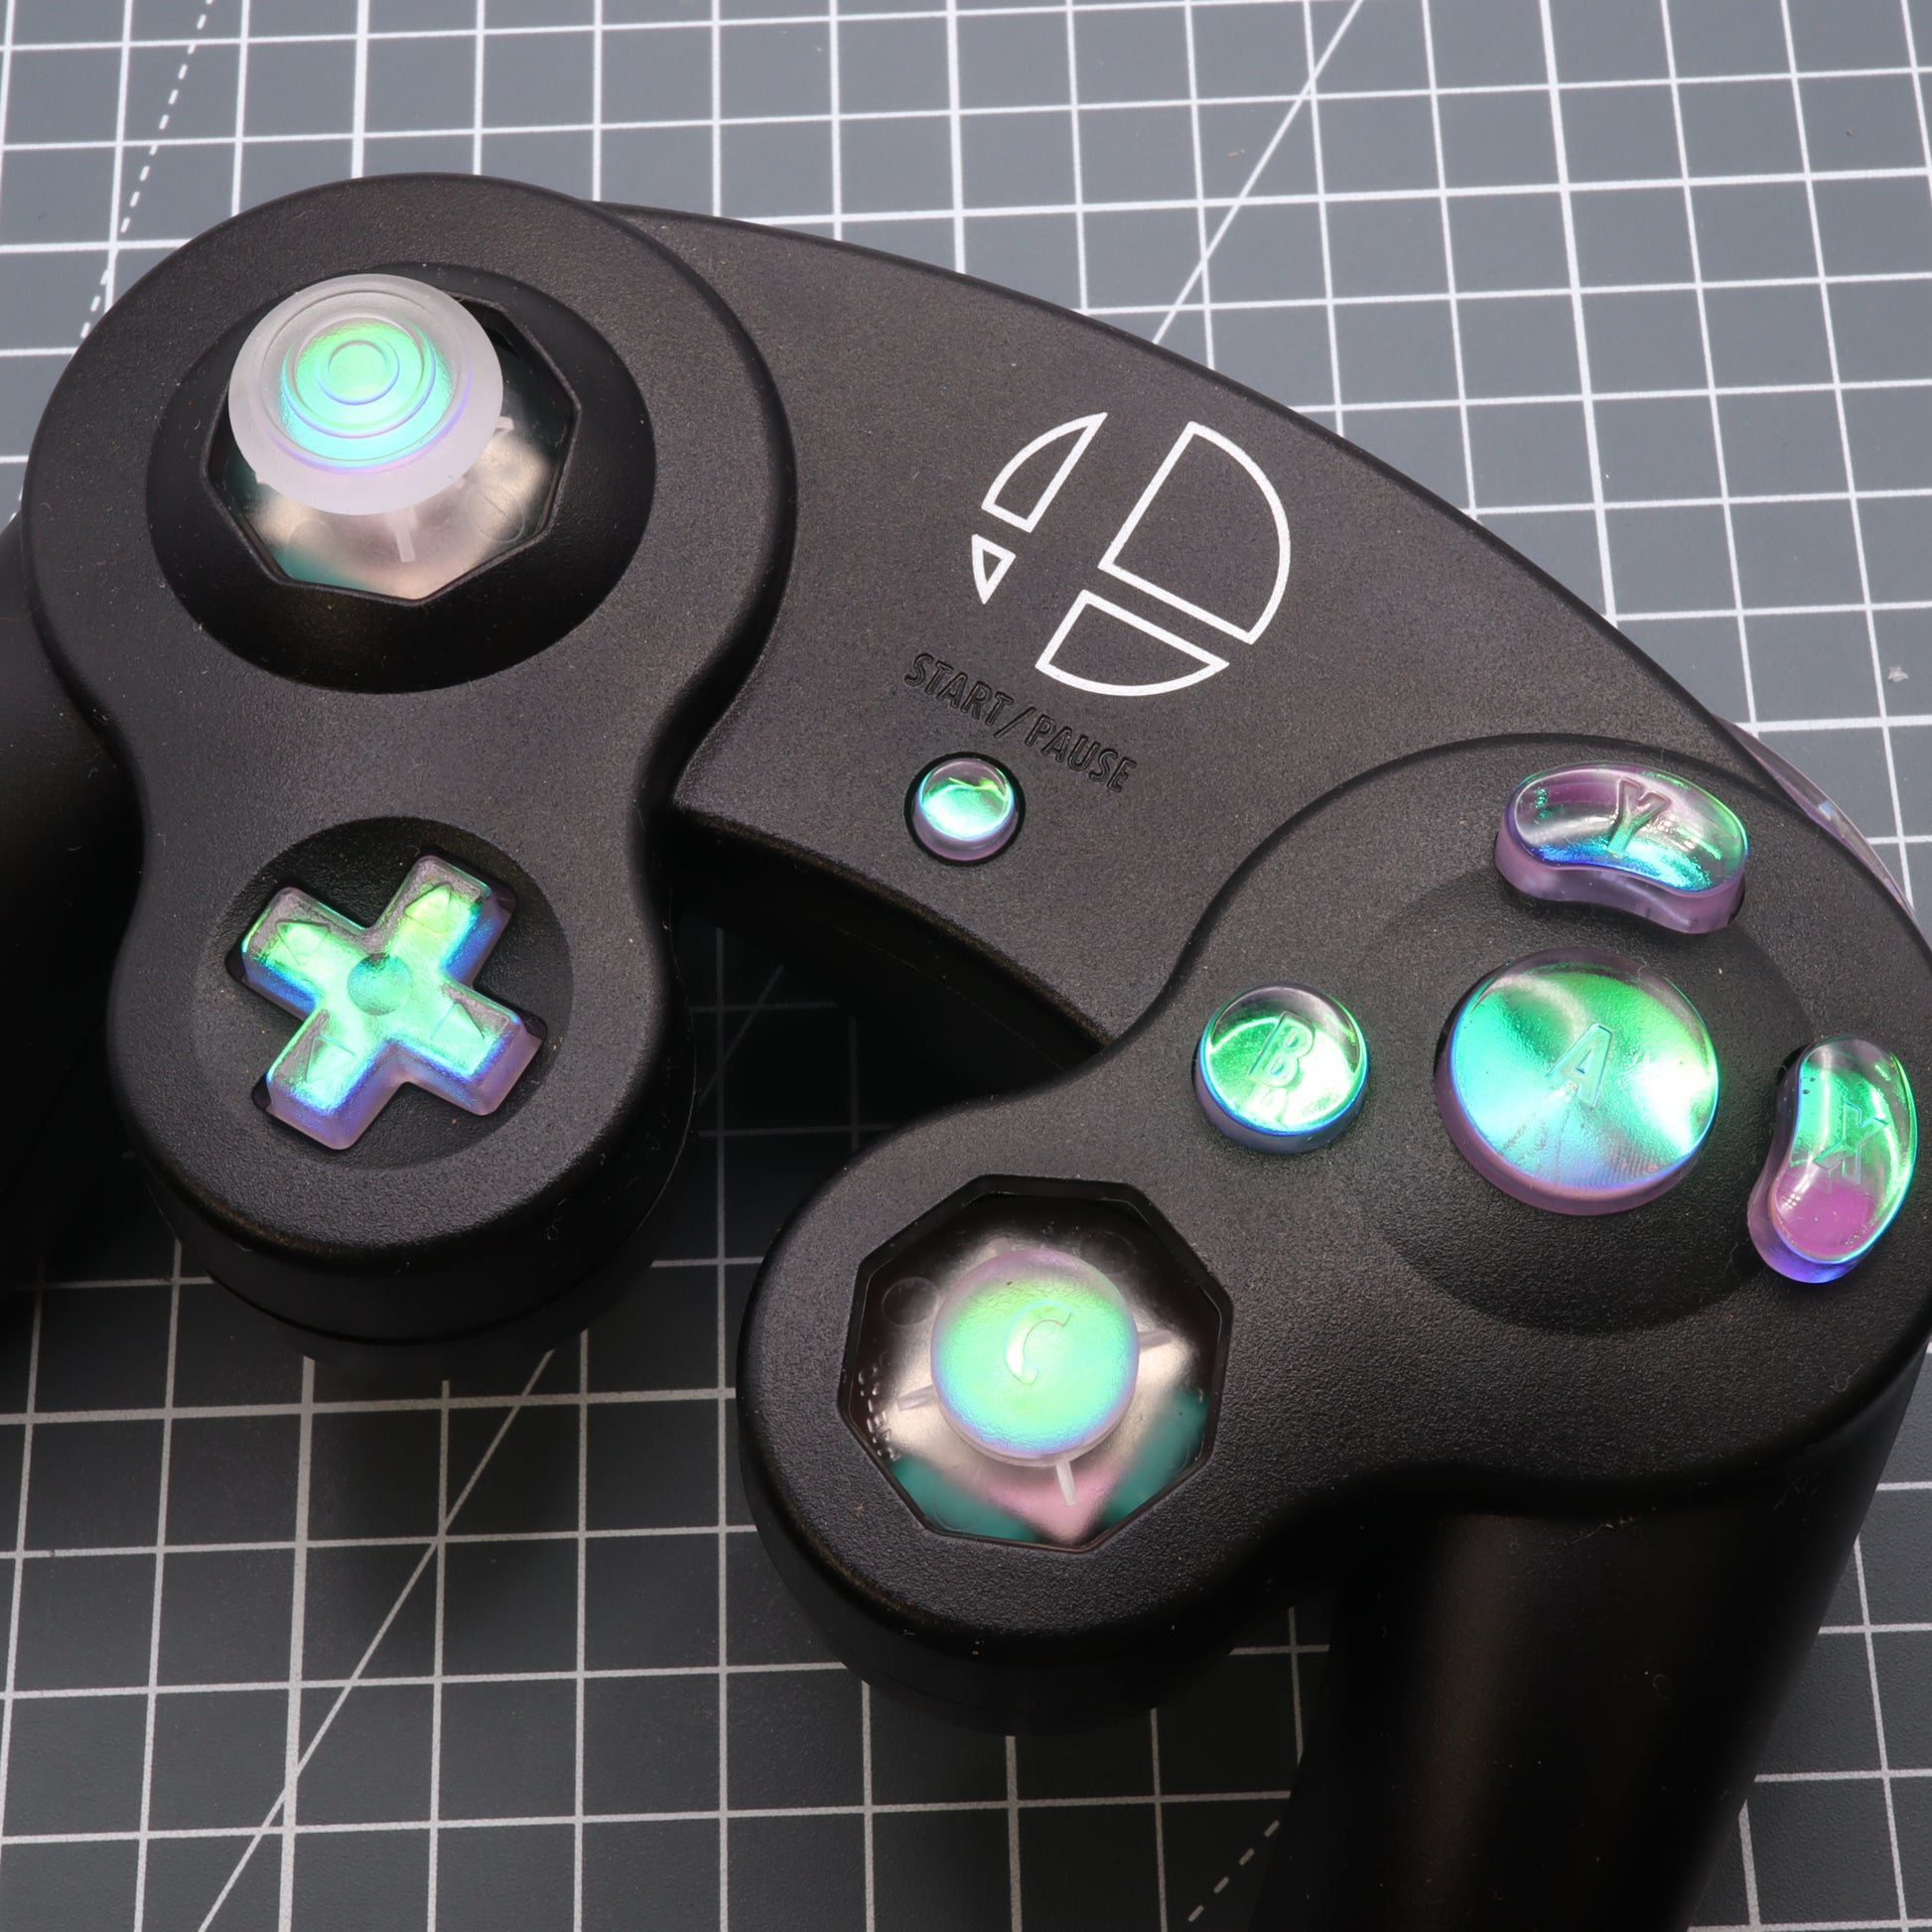 Close-up of a black GameCube controller with Cool Opal custom buttons, analog sticks, and a dichroic effect.